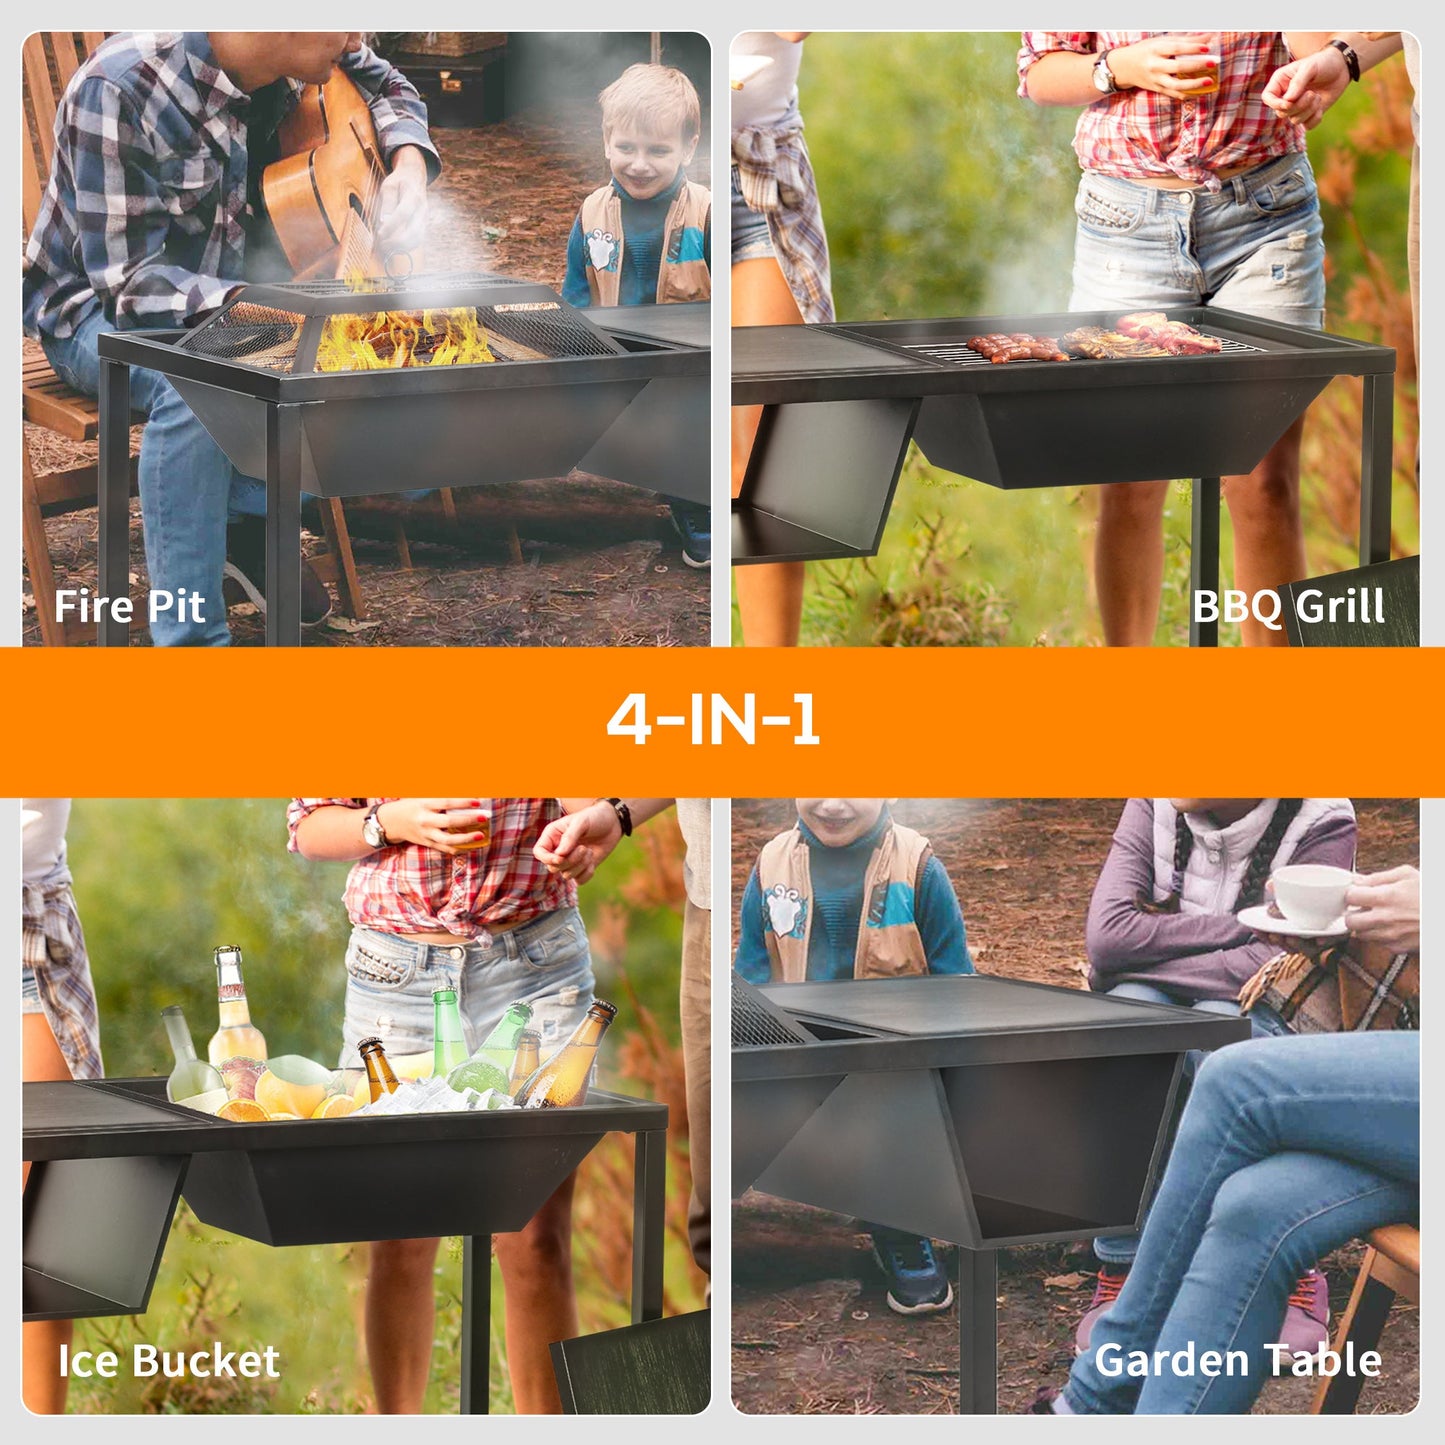 Miscellaneous-32 Inch Metal Fire Pit Table, Wood Burning Fireplace with Spark Screen, Cooking Grate and Waterproof Cover - Outdoor Style Company